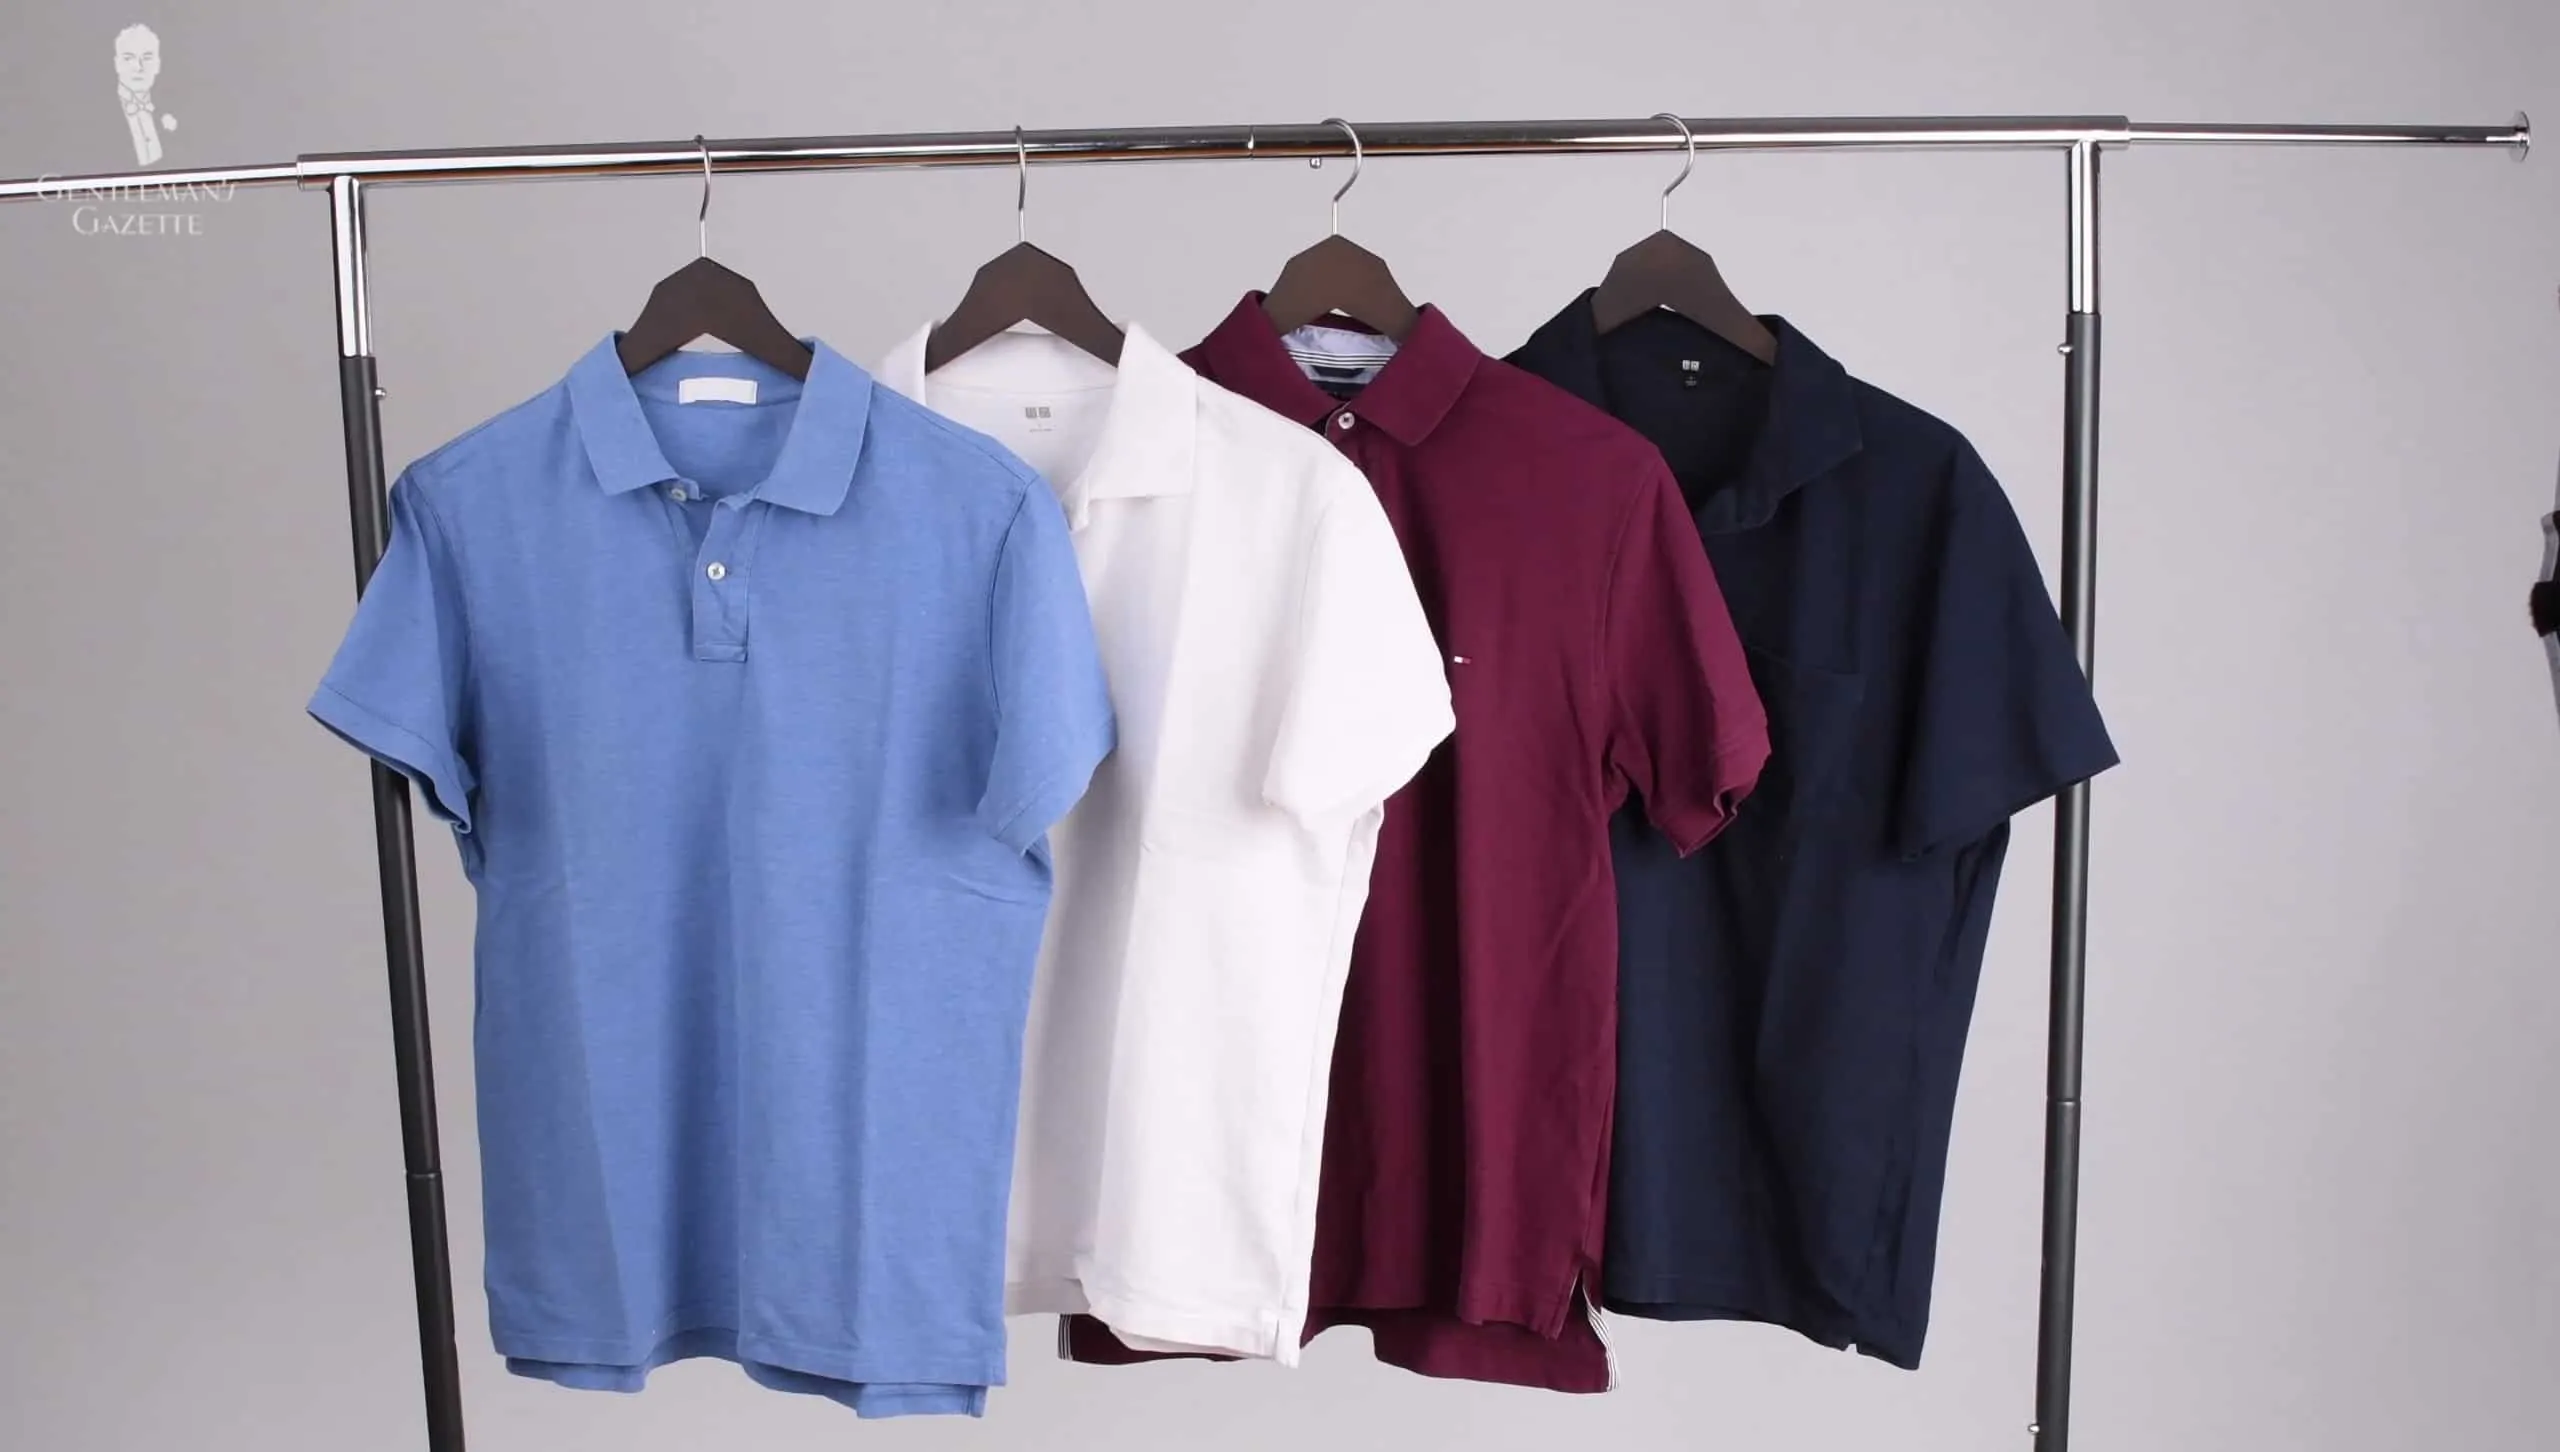 For polo shirts, go for solid neutral colors.